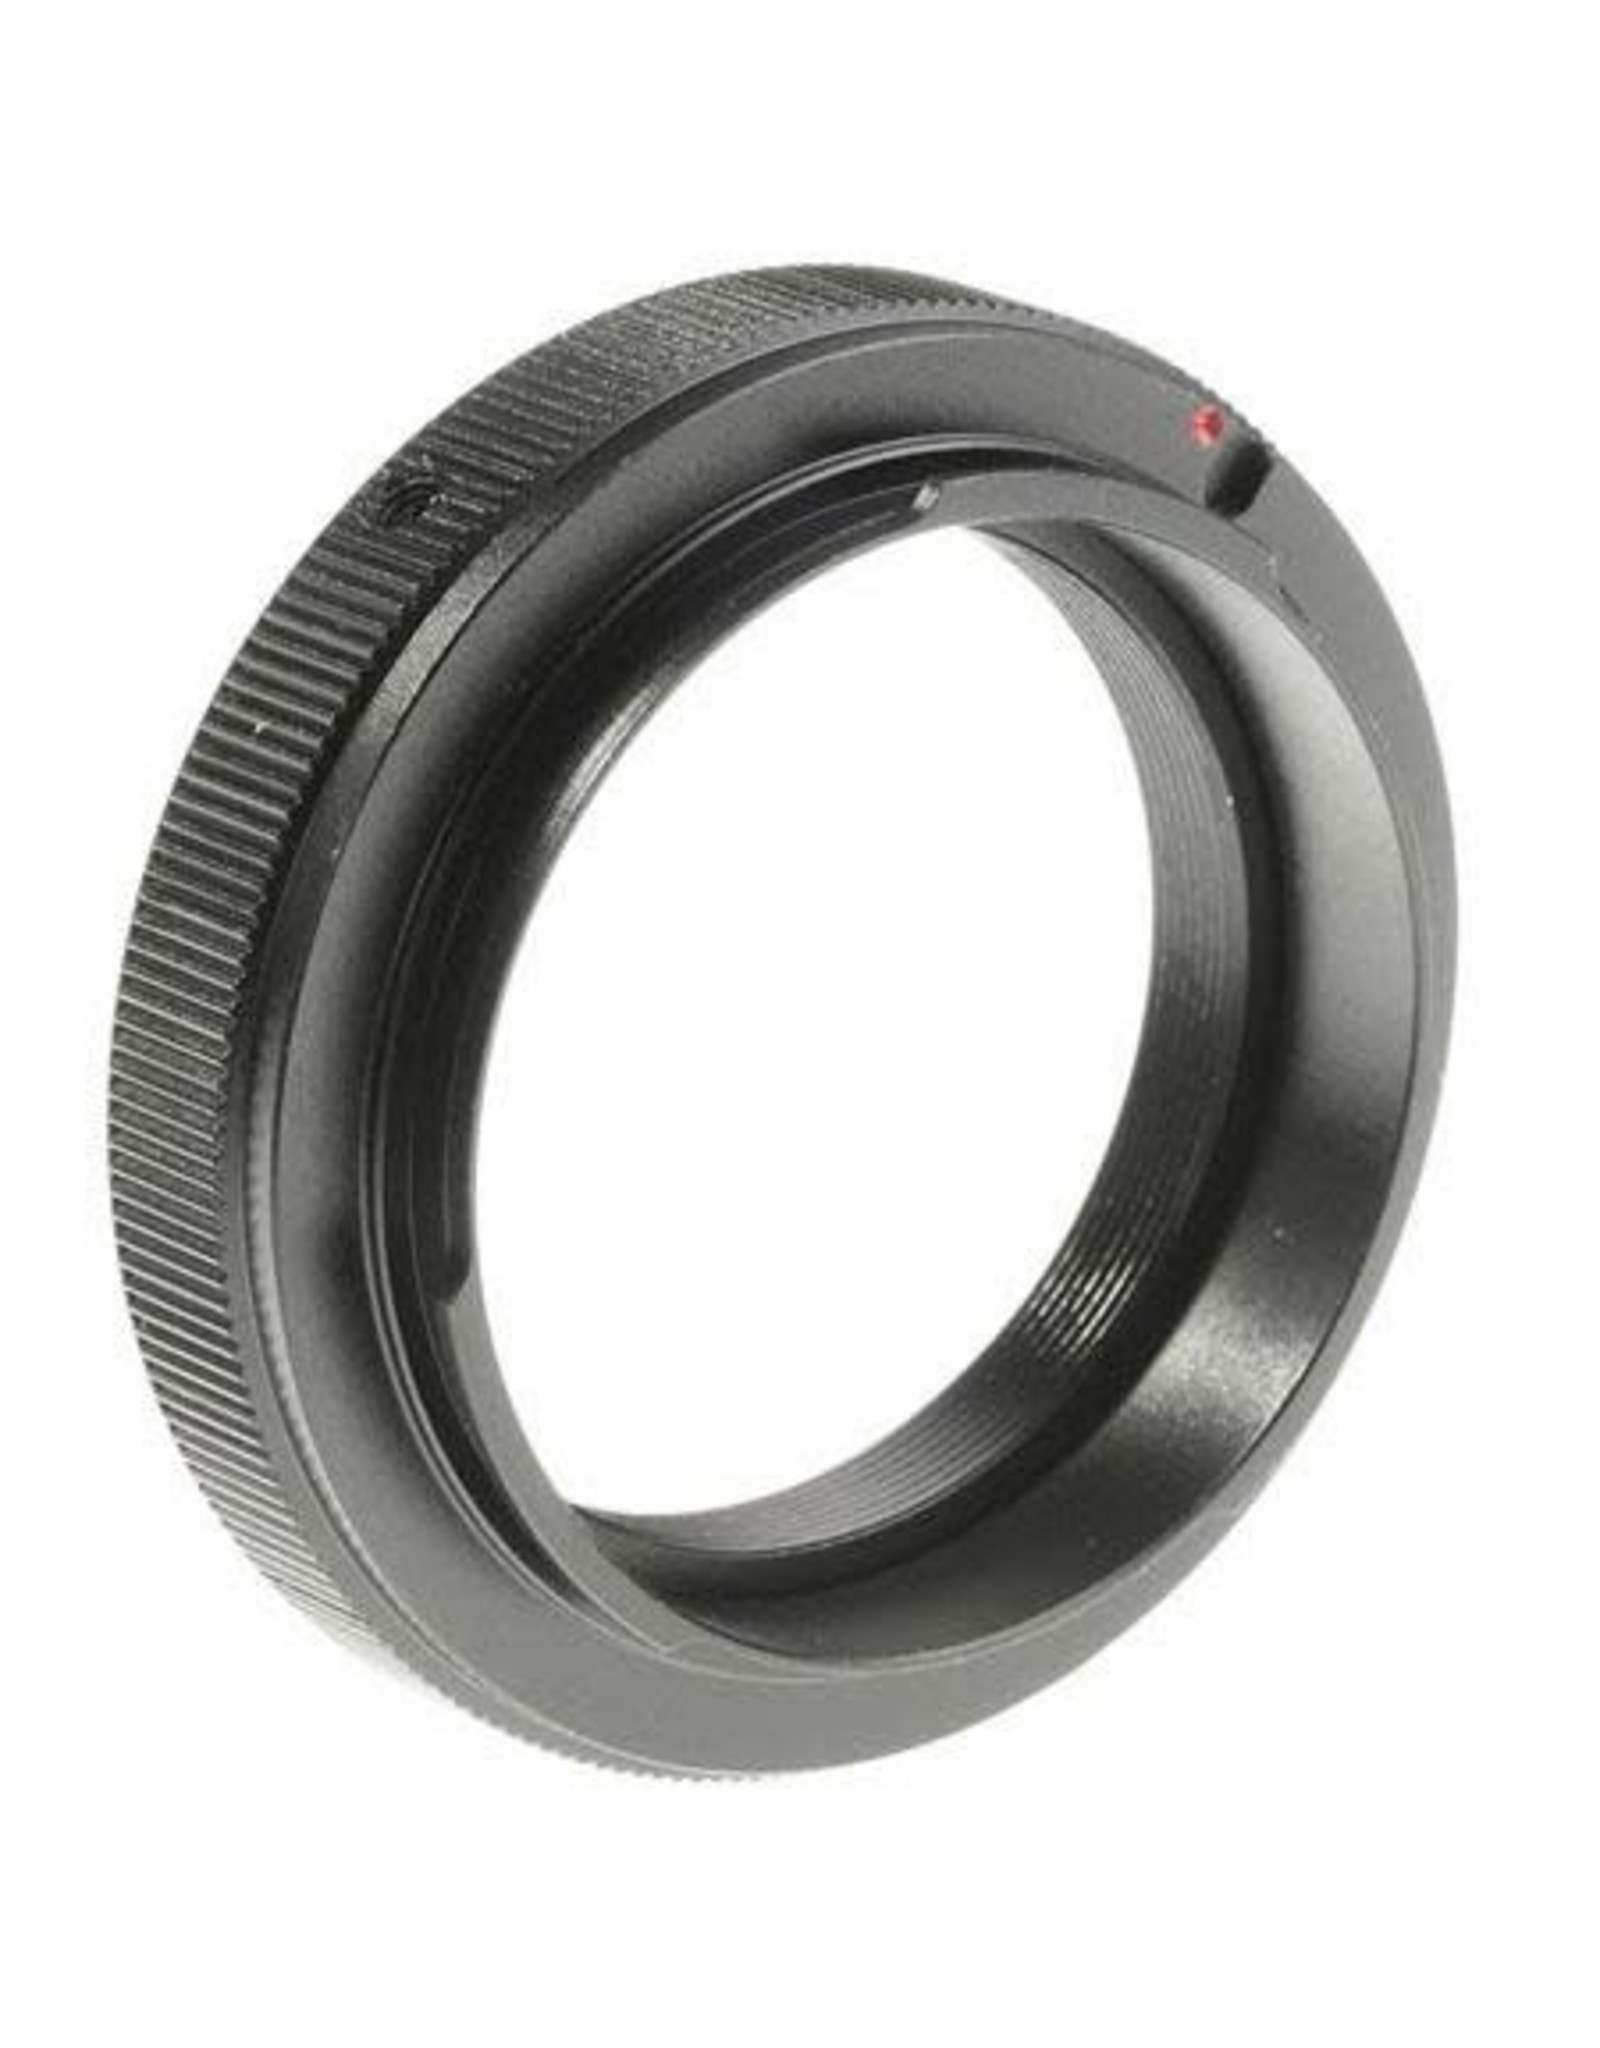 Bower T Mount Adapter Ring Olympus Micro 4/3